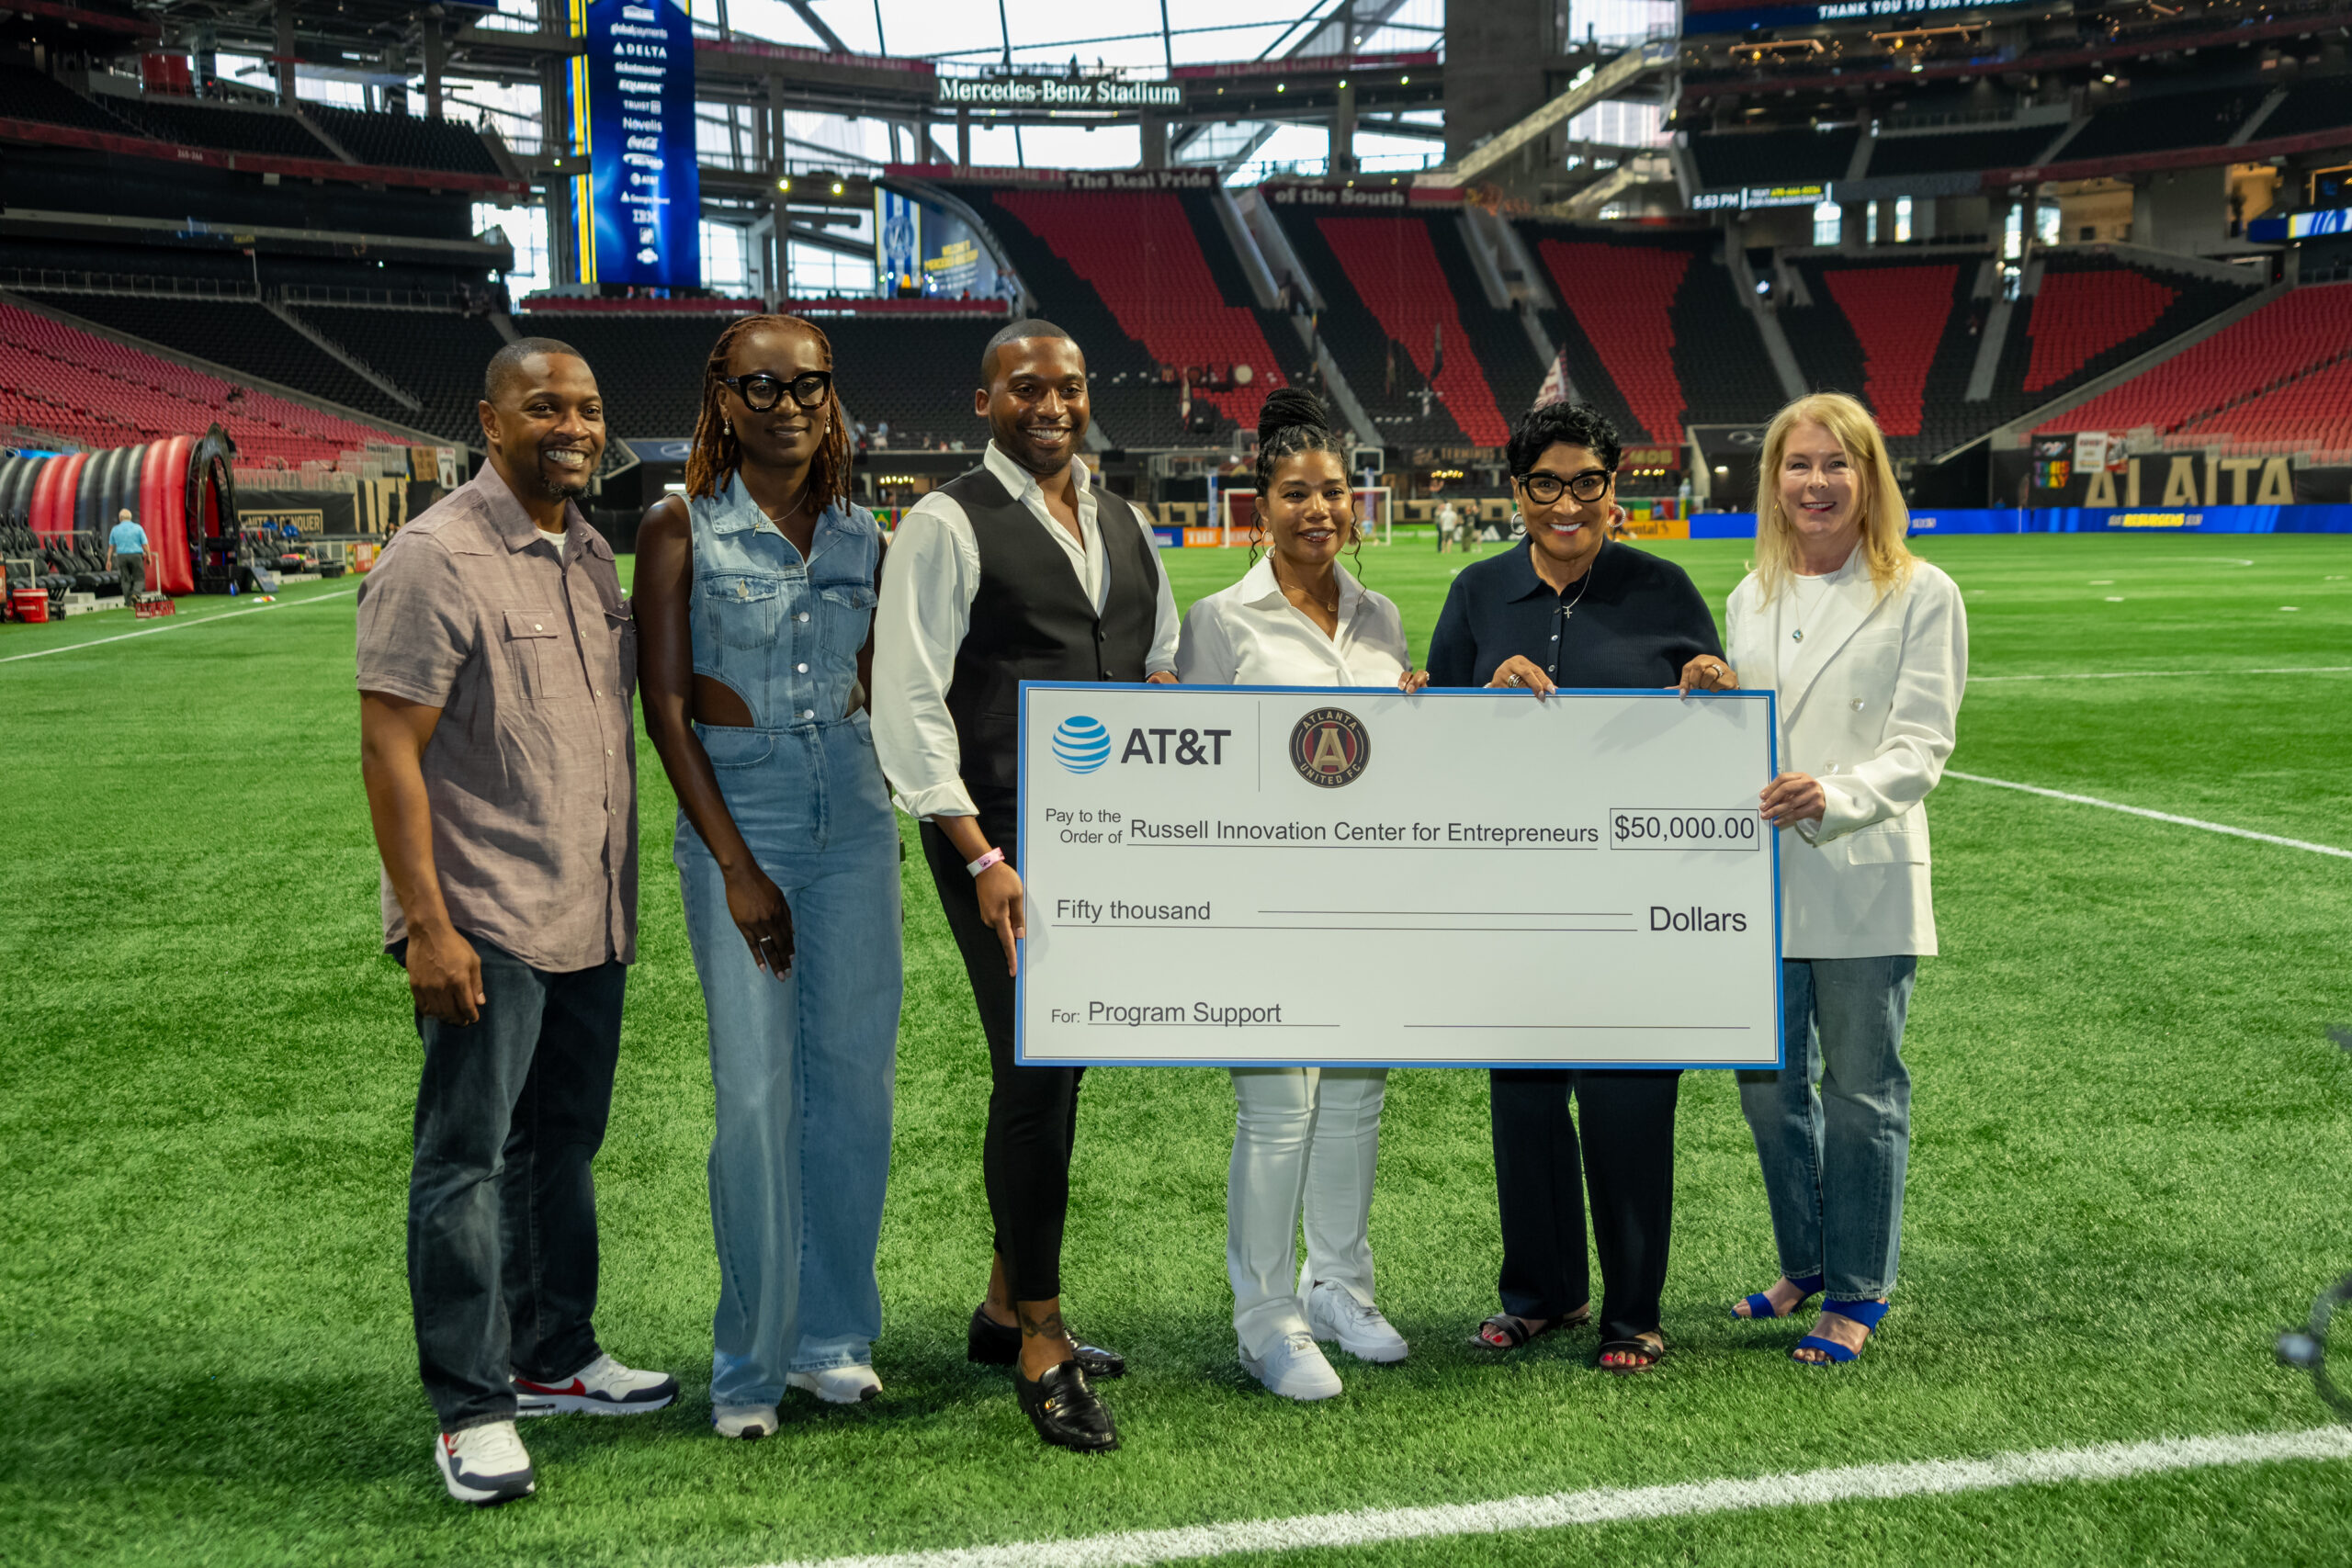 Vanessa Harrison, President of AT&T Southeast Coastal States, presented the check to our very own Shawn Graham, Executive Vice President and Chief Administrative Officer, and Dr. Quintin Bostic, Associate Director of Programming and Project Management.